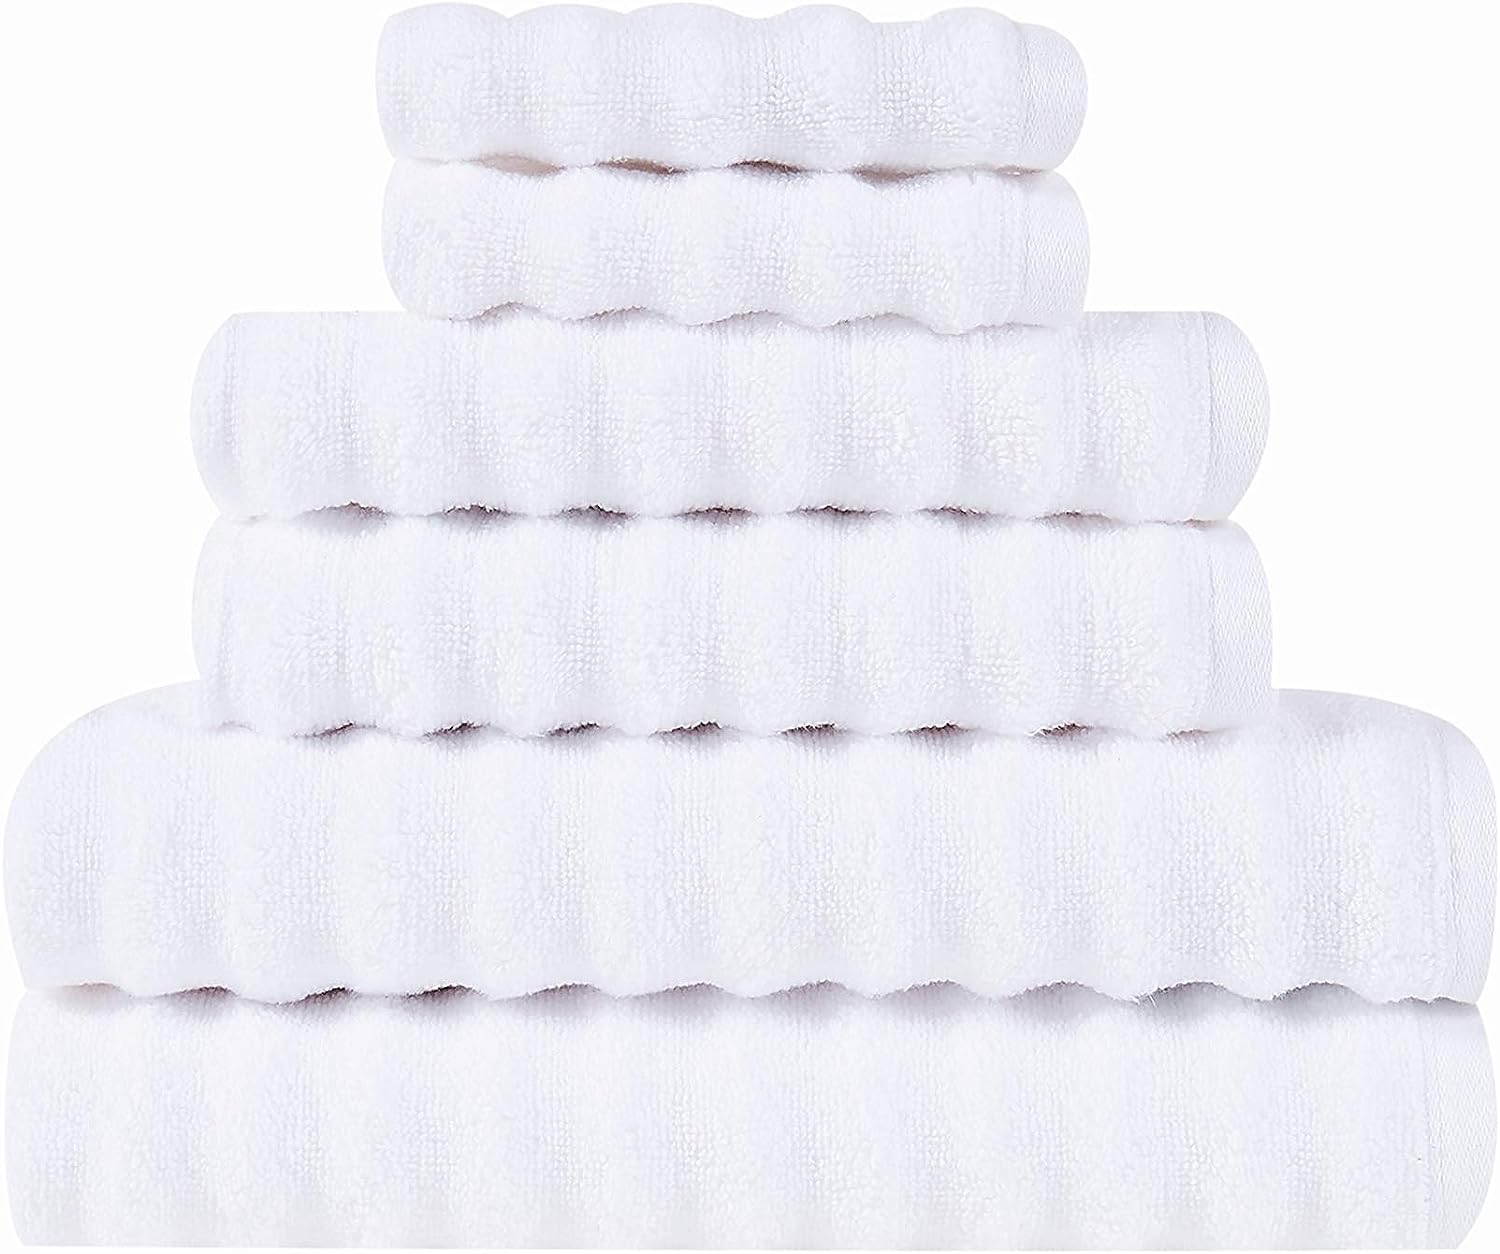  Luxury White Bath Towel Set - Combed Cotton Hotel Quality  Absorbent 8 Piece Towels, 2 Bath Towels 700GSM, 2 Hand Towels, 4  Washcloths [Worth $72.95] 8Pc